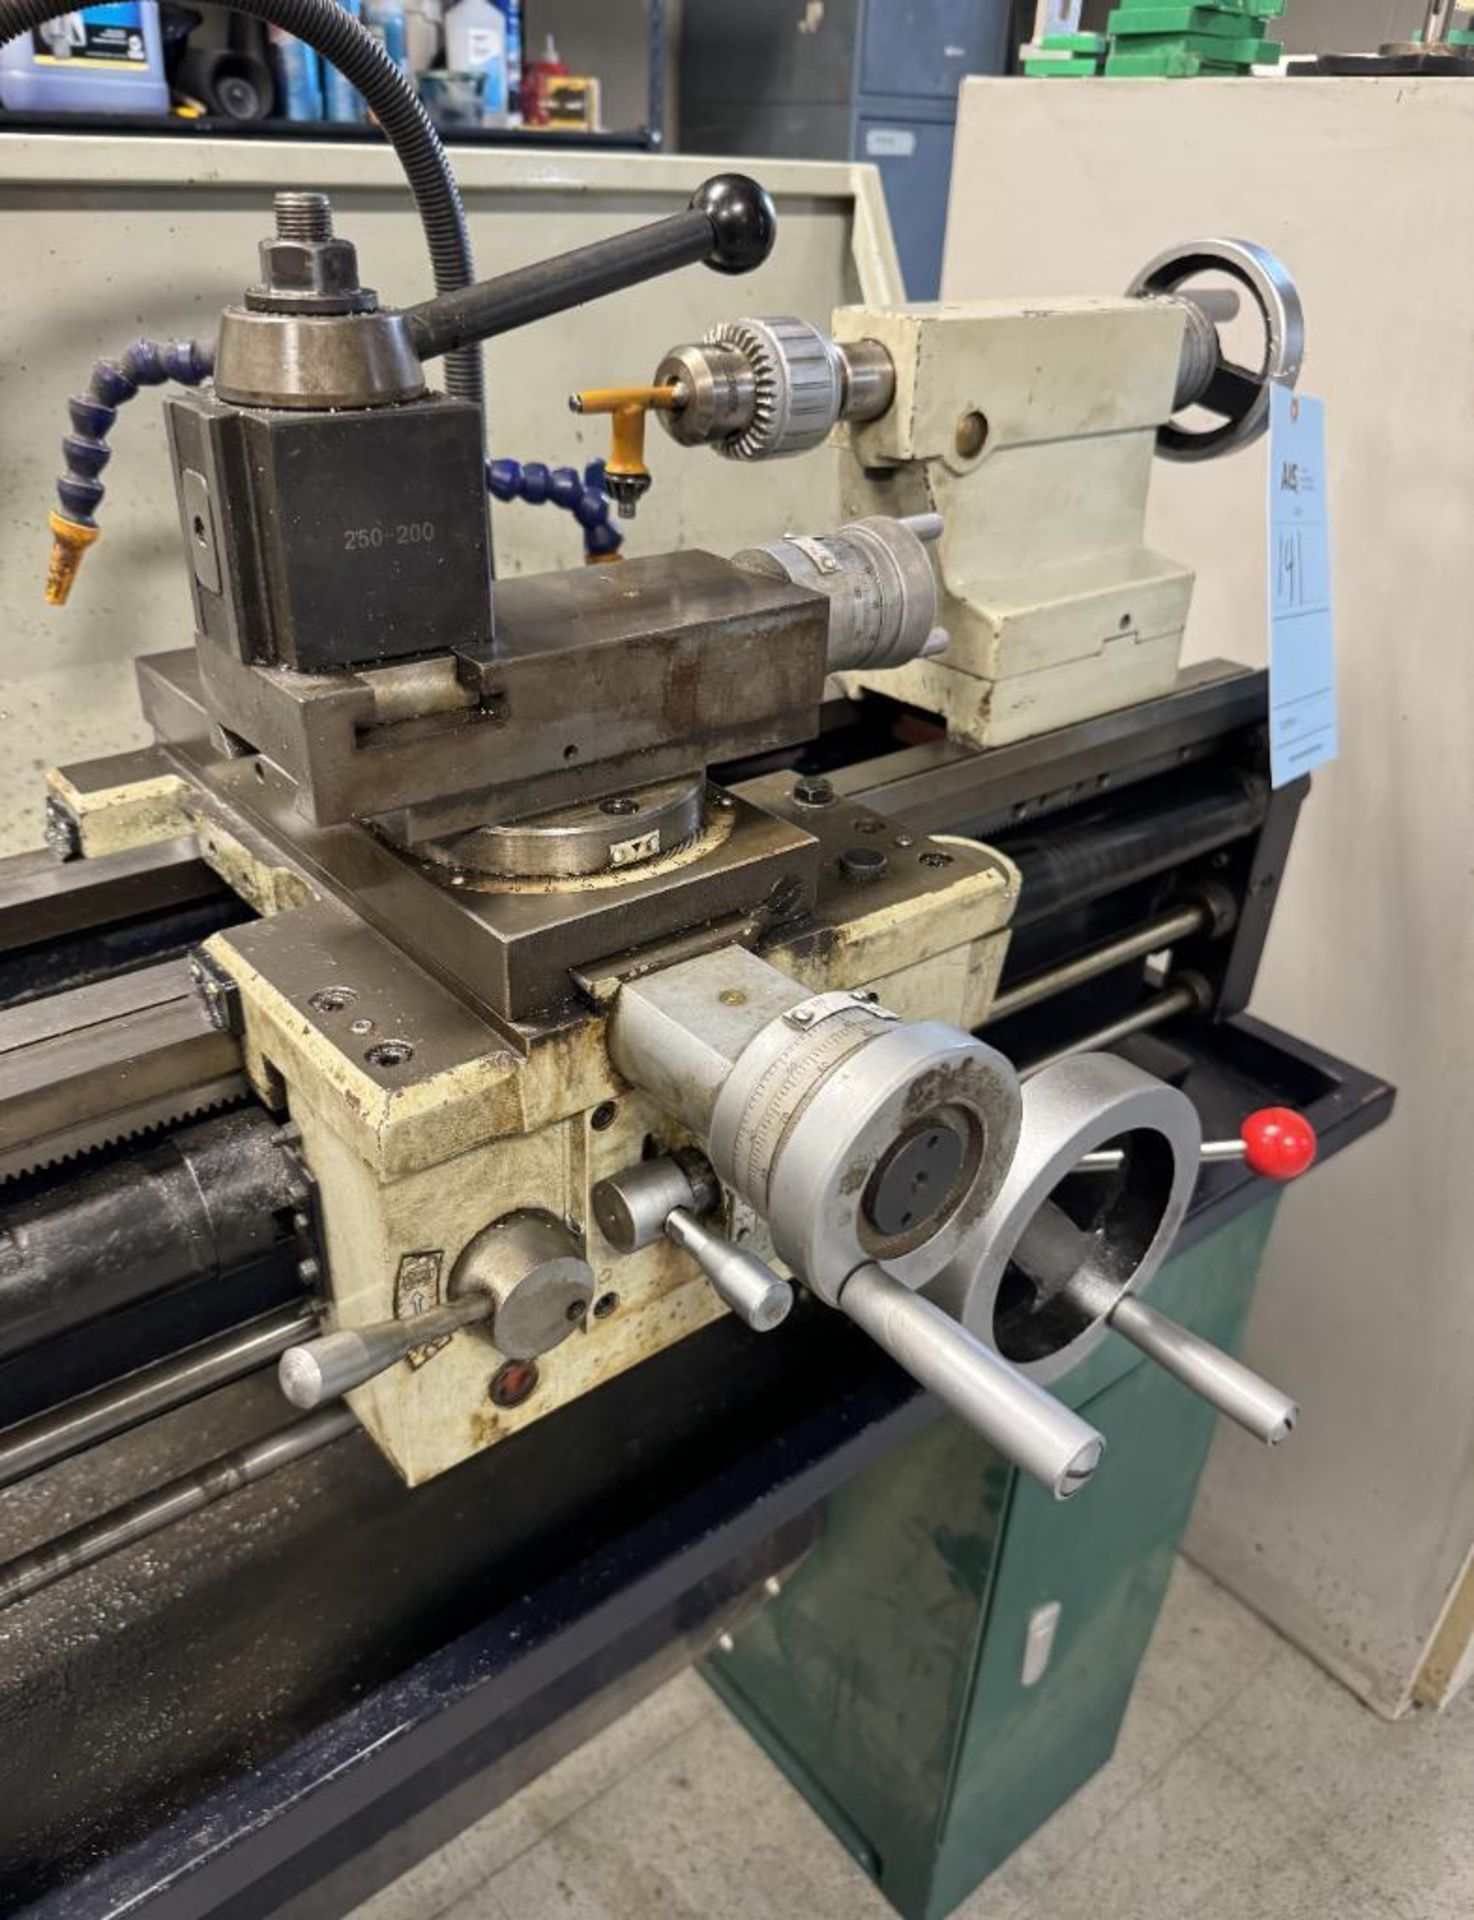 Bolton Tools 14" X 40" Metal Lathe, Model BT1440-3, Serial# 14600168, Built 2014. With misc. tooling - Image 6 of 15